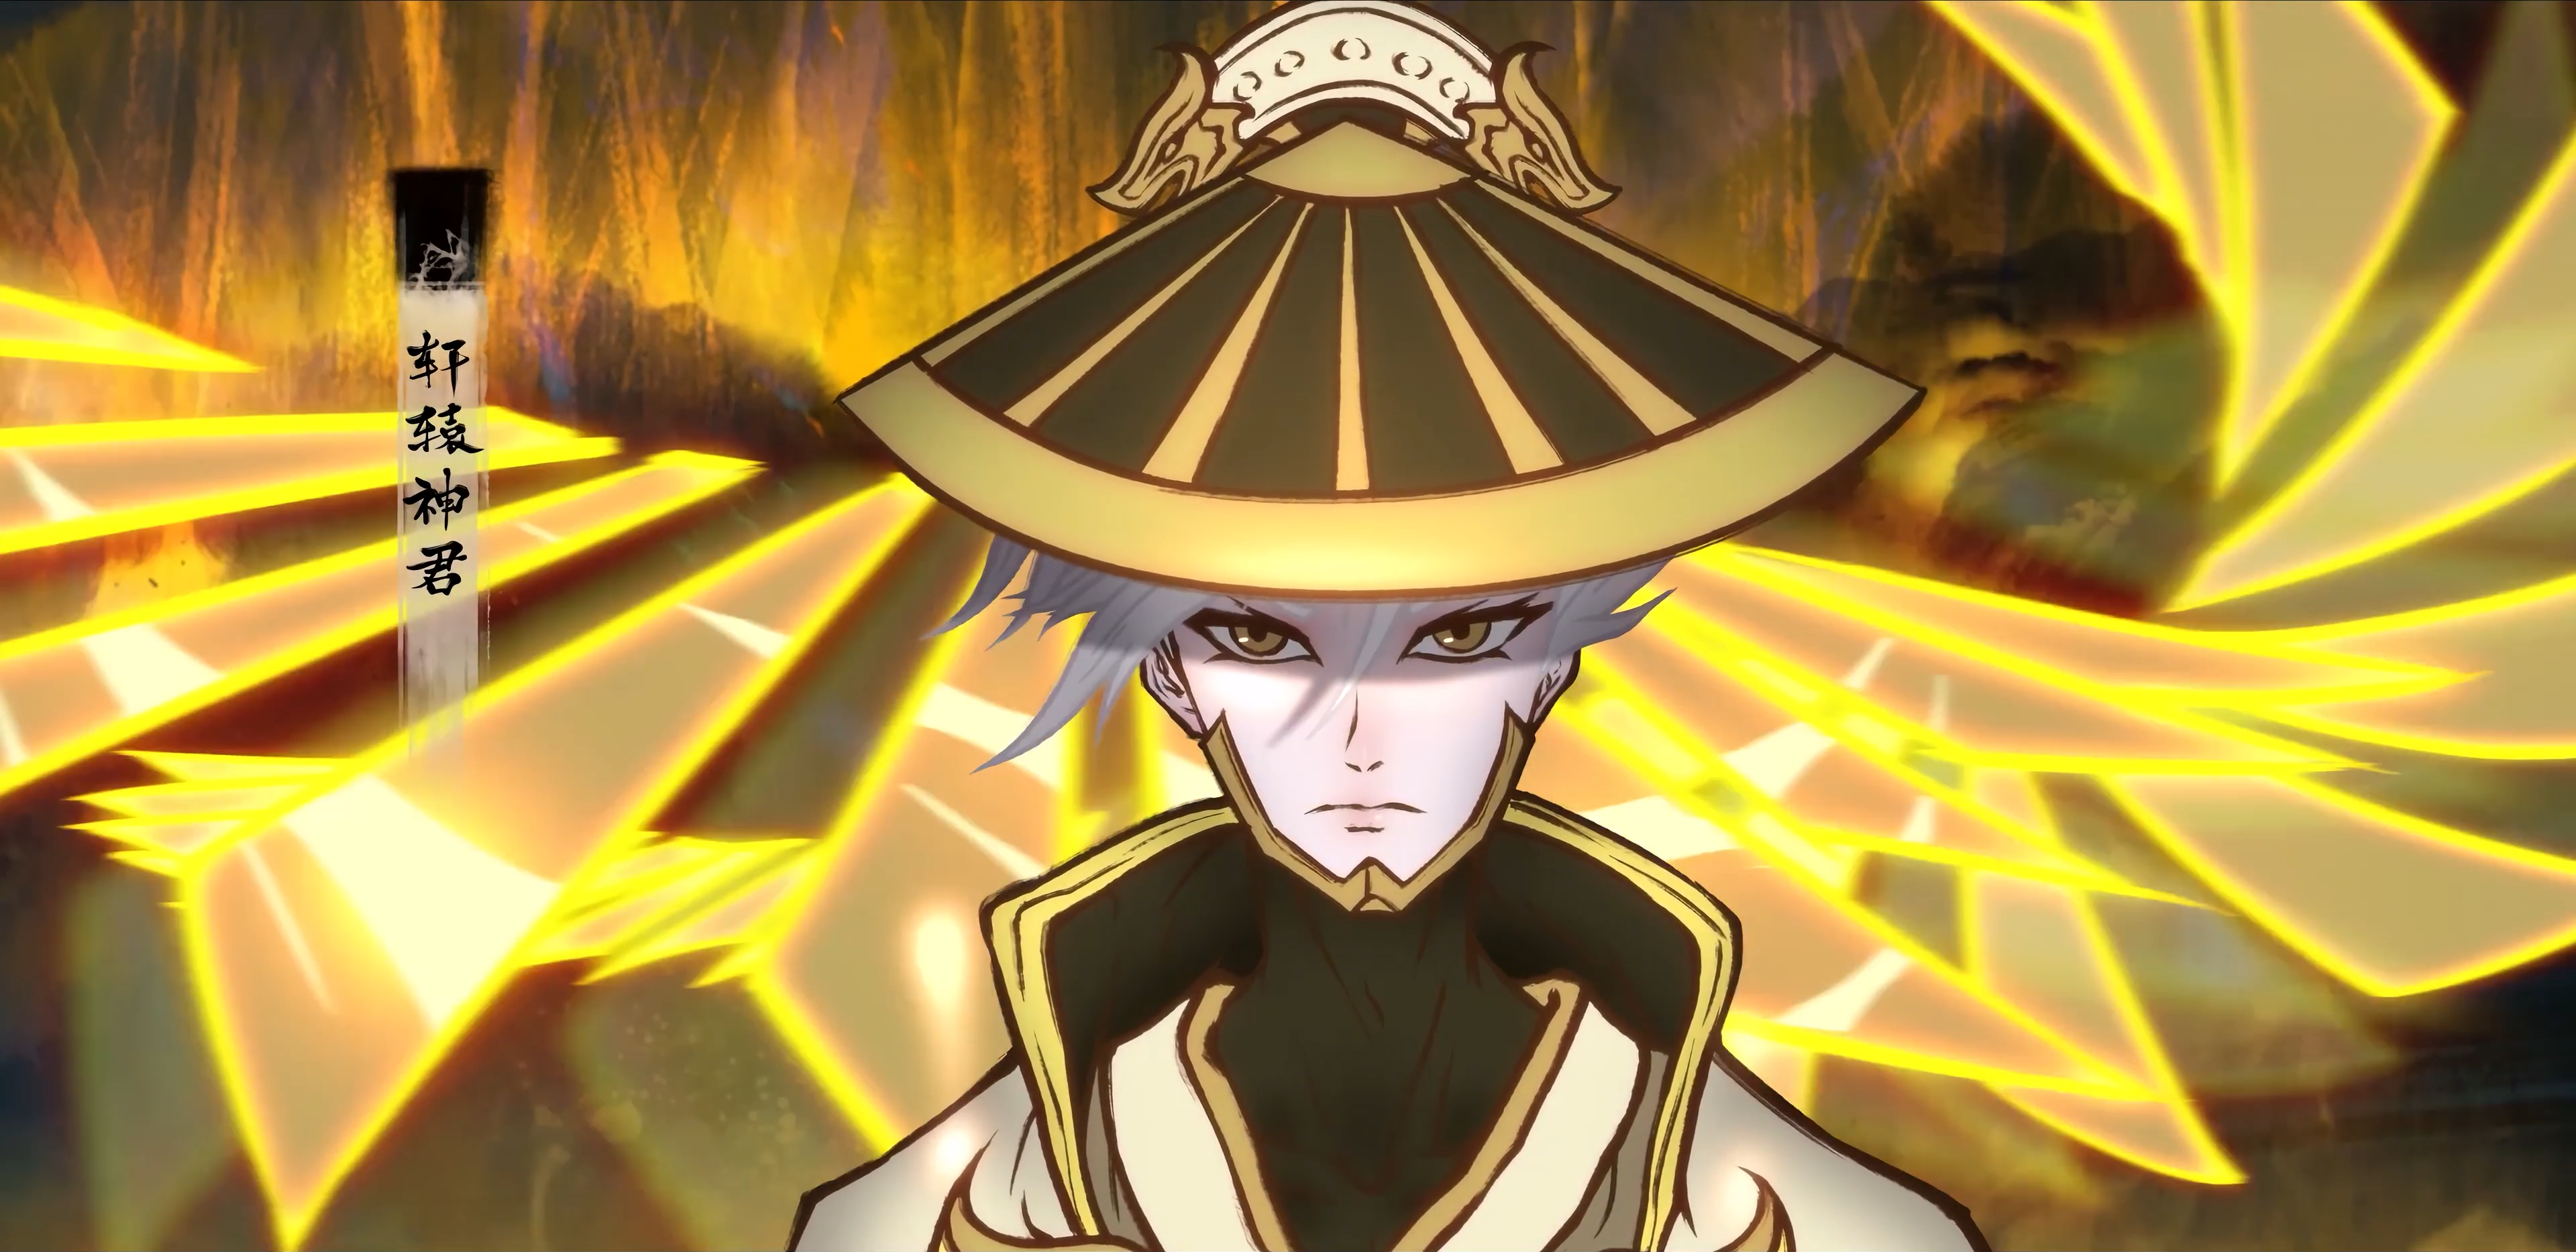 Anime 3840x1867 Chinese cartoon screen shot men looking at viewer frown Chinese hat